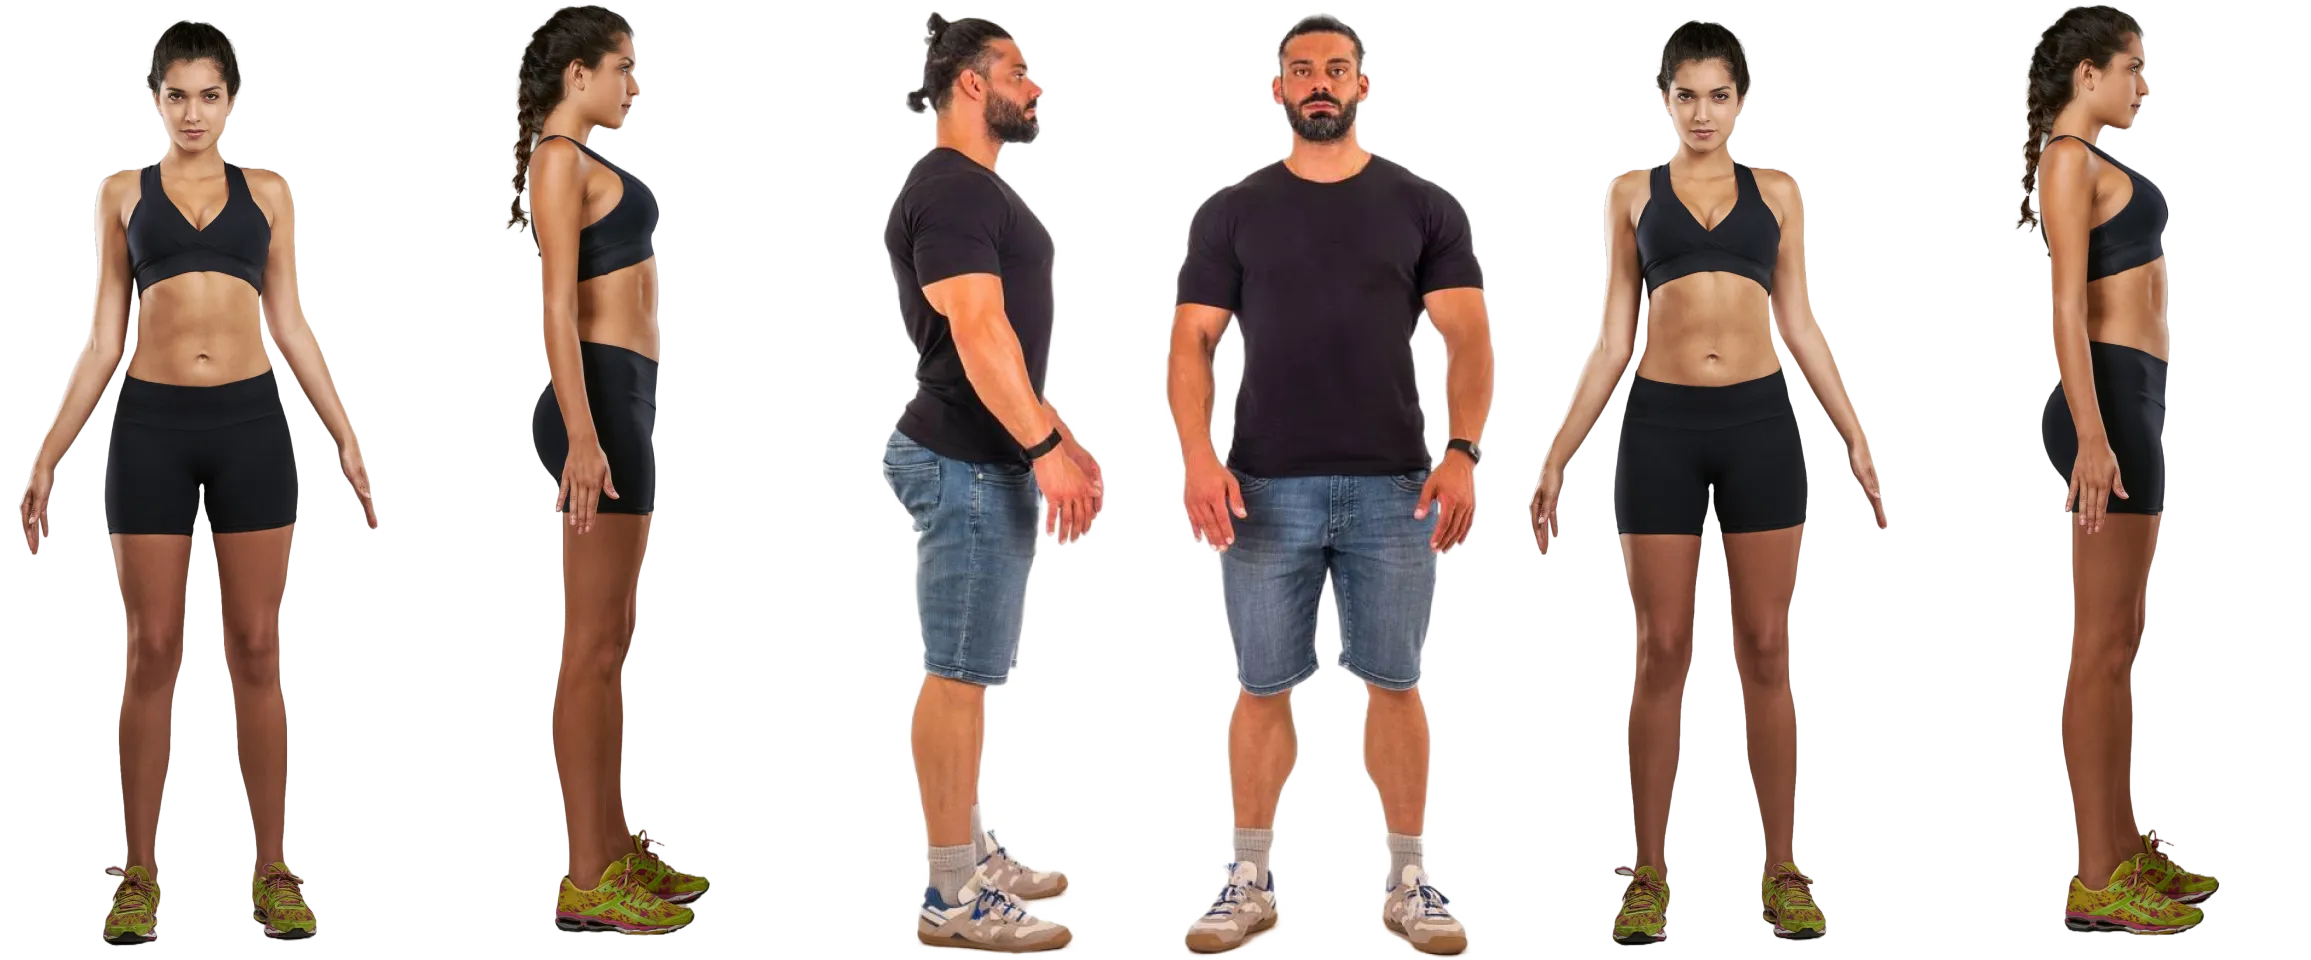 Photos of a man and woman body standing in front and side profile